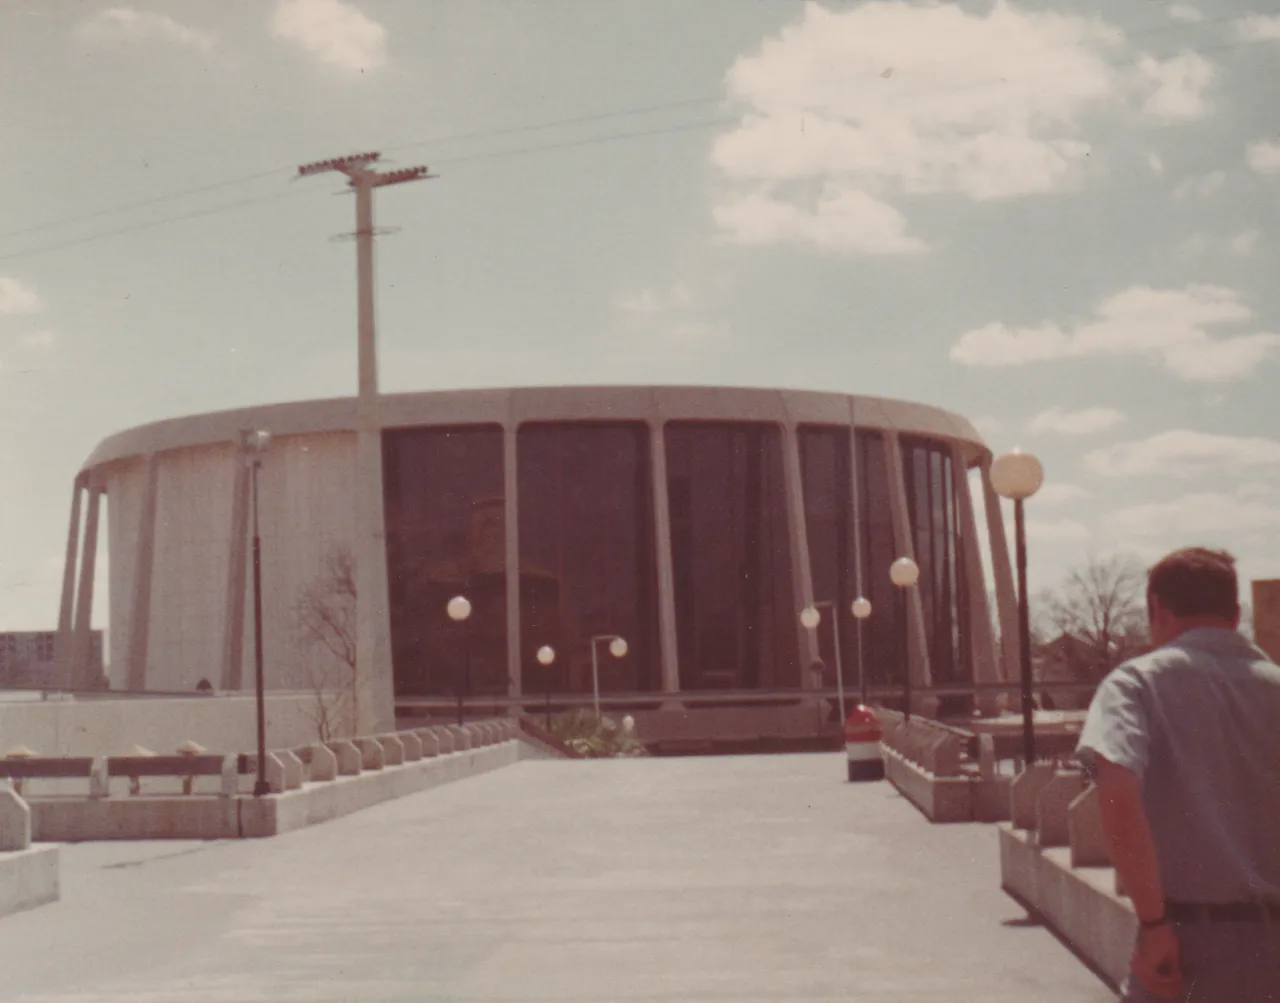 1975-03-26 - Wednesday - San Antonio, no dates on these pic-01 - Round Building, man, 11pics.png